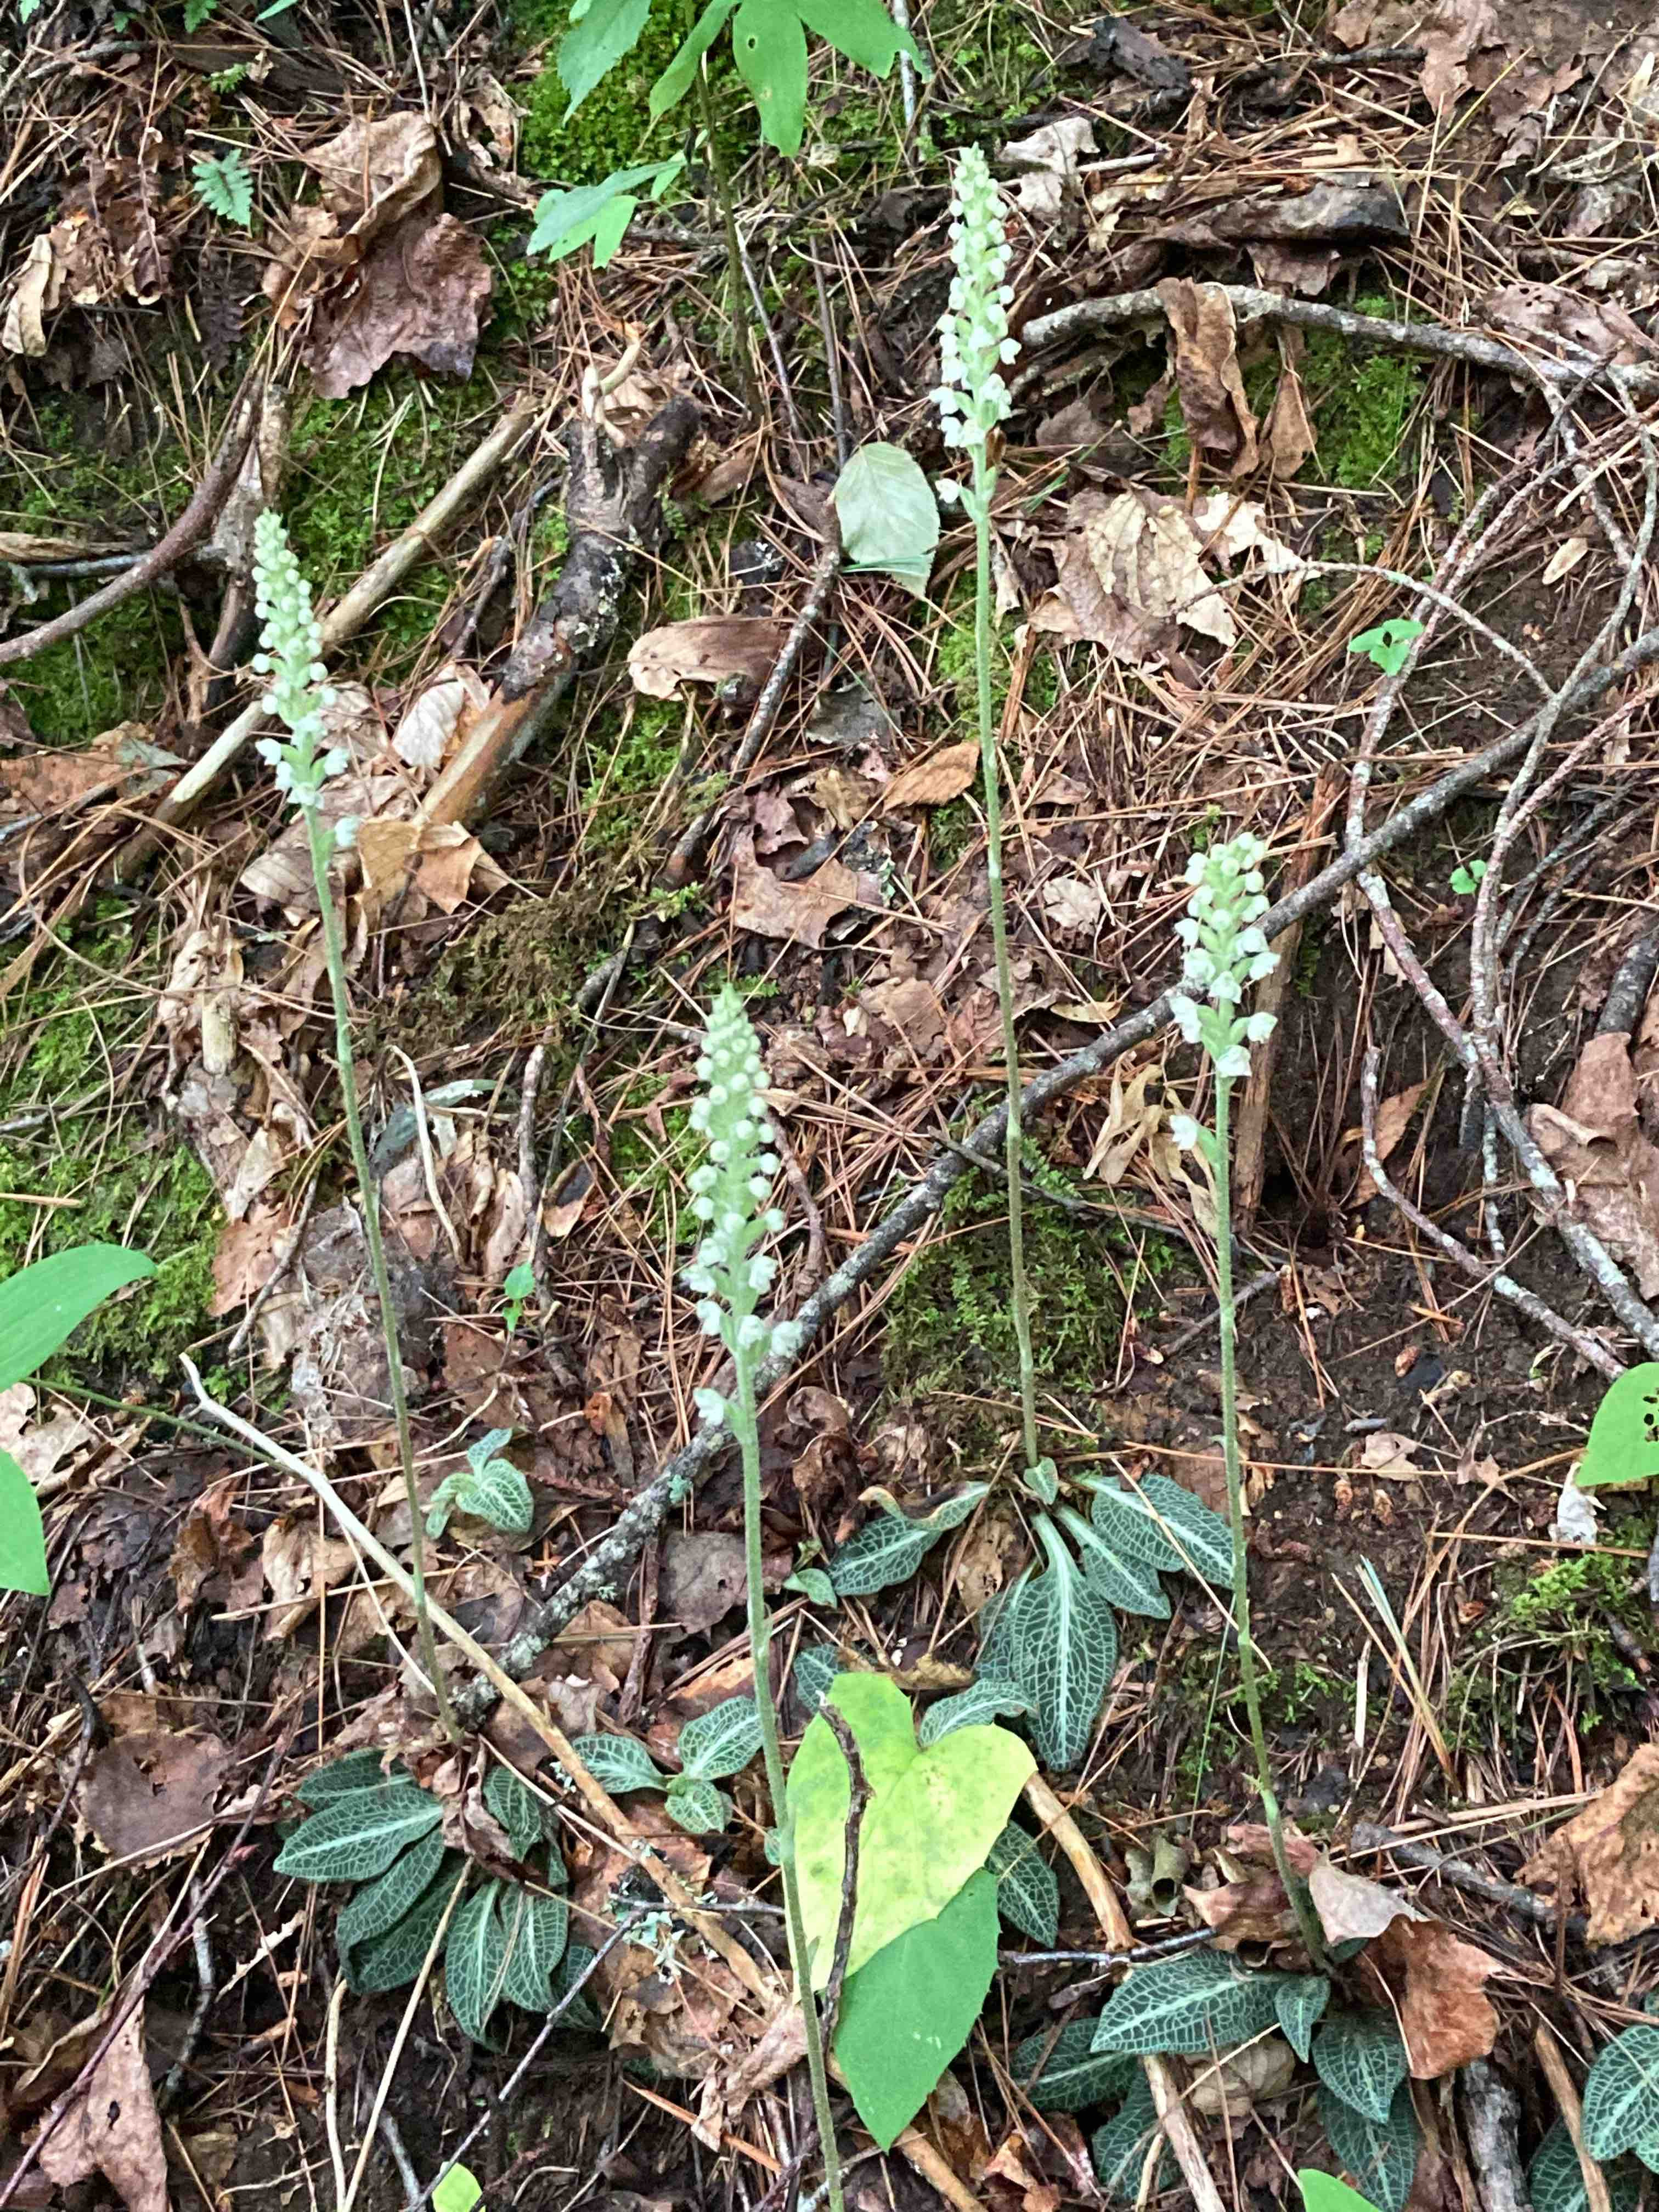 The Scientific Name is Goodyera pubescens. You will likely hear them called Downy Rattlesnake-orchid, Downy Rattlesnake-plantain. This picture shows the Lighting up the forest floor! of Goodyera pubescens